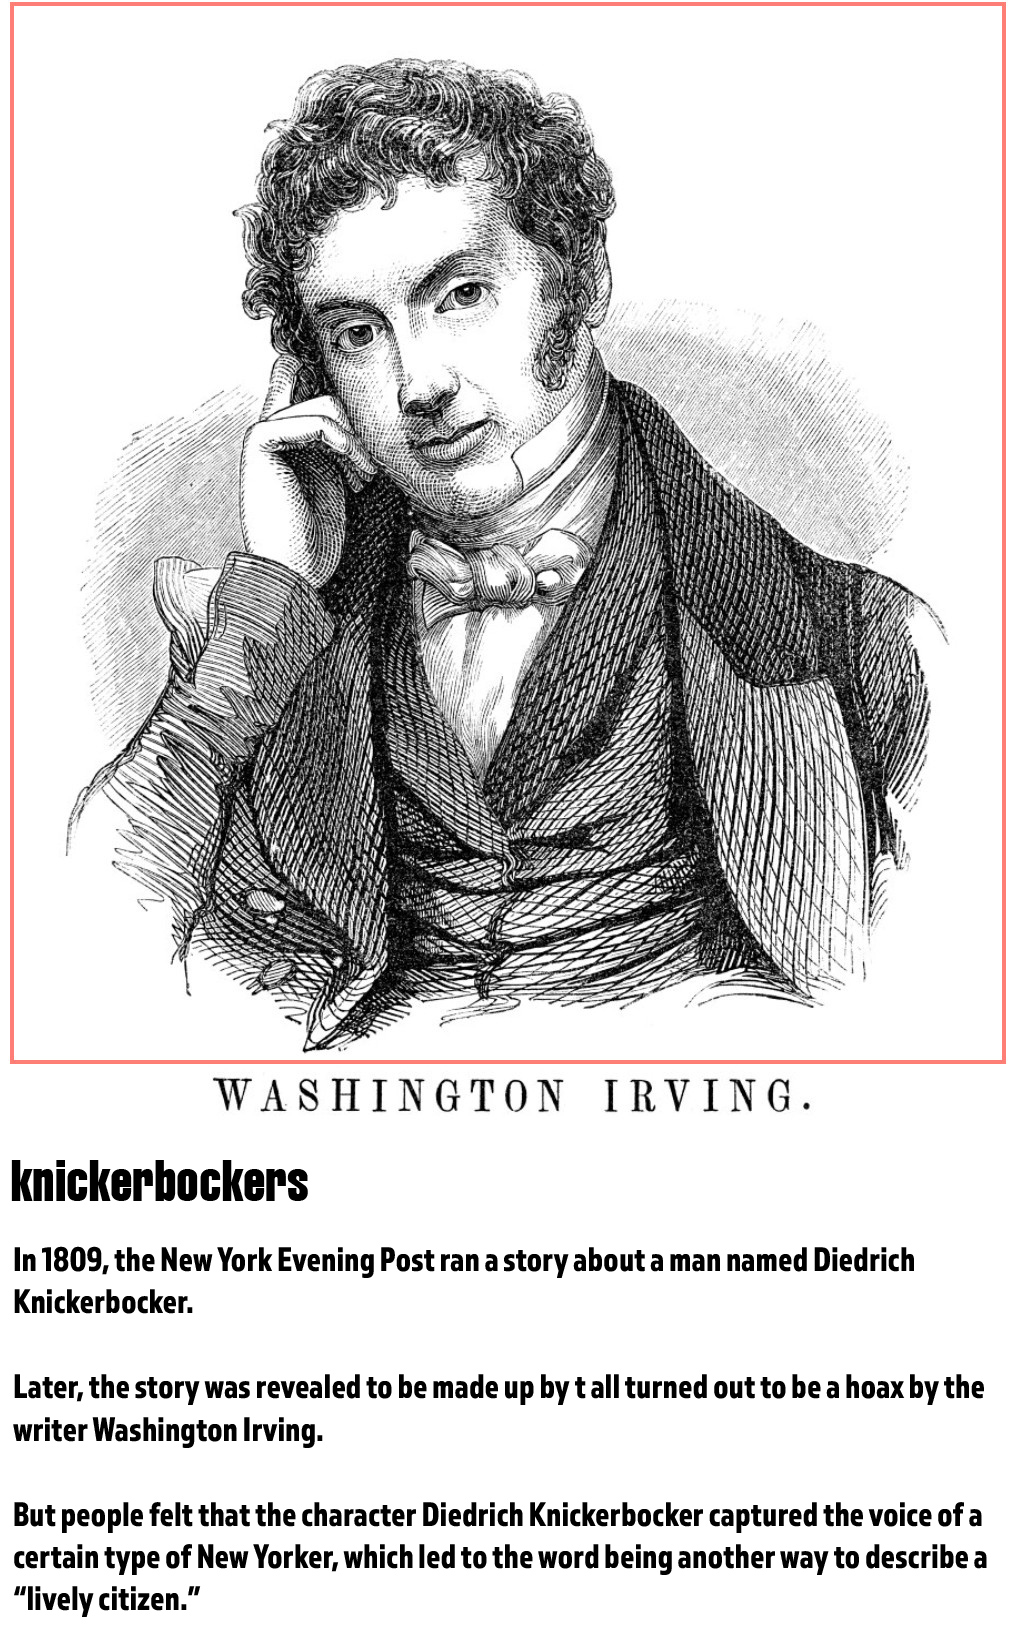 fun word origins history facts - knickerbockers - In 1809, the New York Evening Post ran a story about a man named Diedrich Knickerbocker. Later , the story was revealed to be made up byt all turned out to be a hoax by the writer Washington Irving. But pe